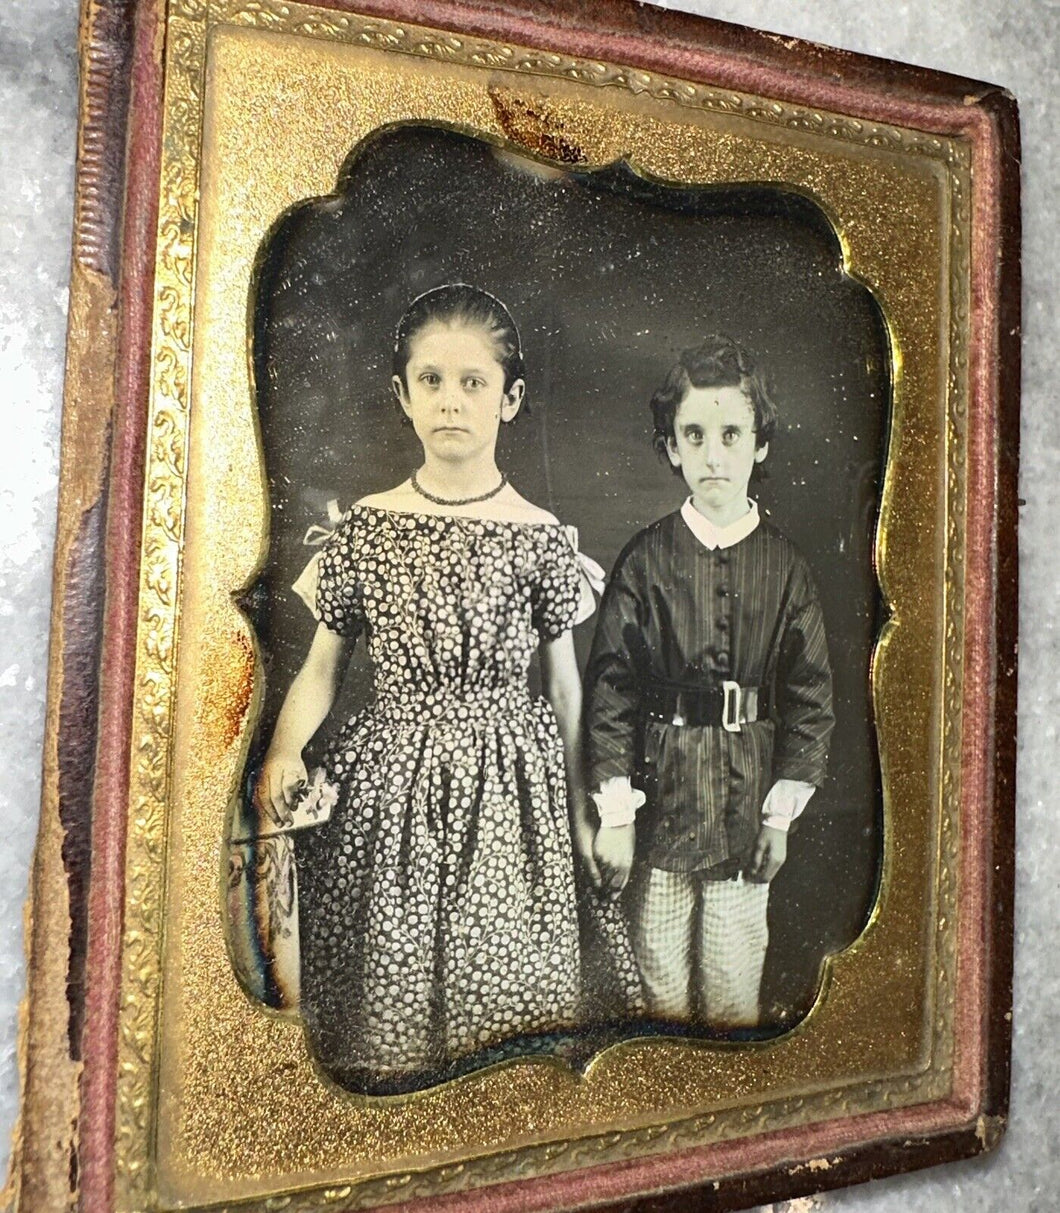 1/6 Daguerreotype ID'd Culbert Siblings Family TRAGEDY Boy Drowned in Lake NY